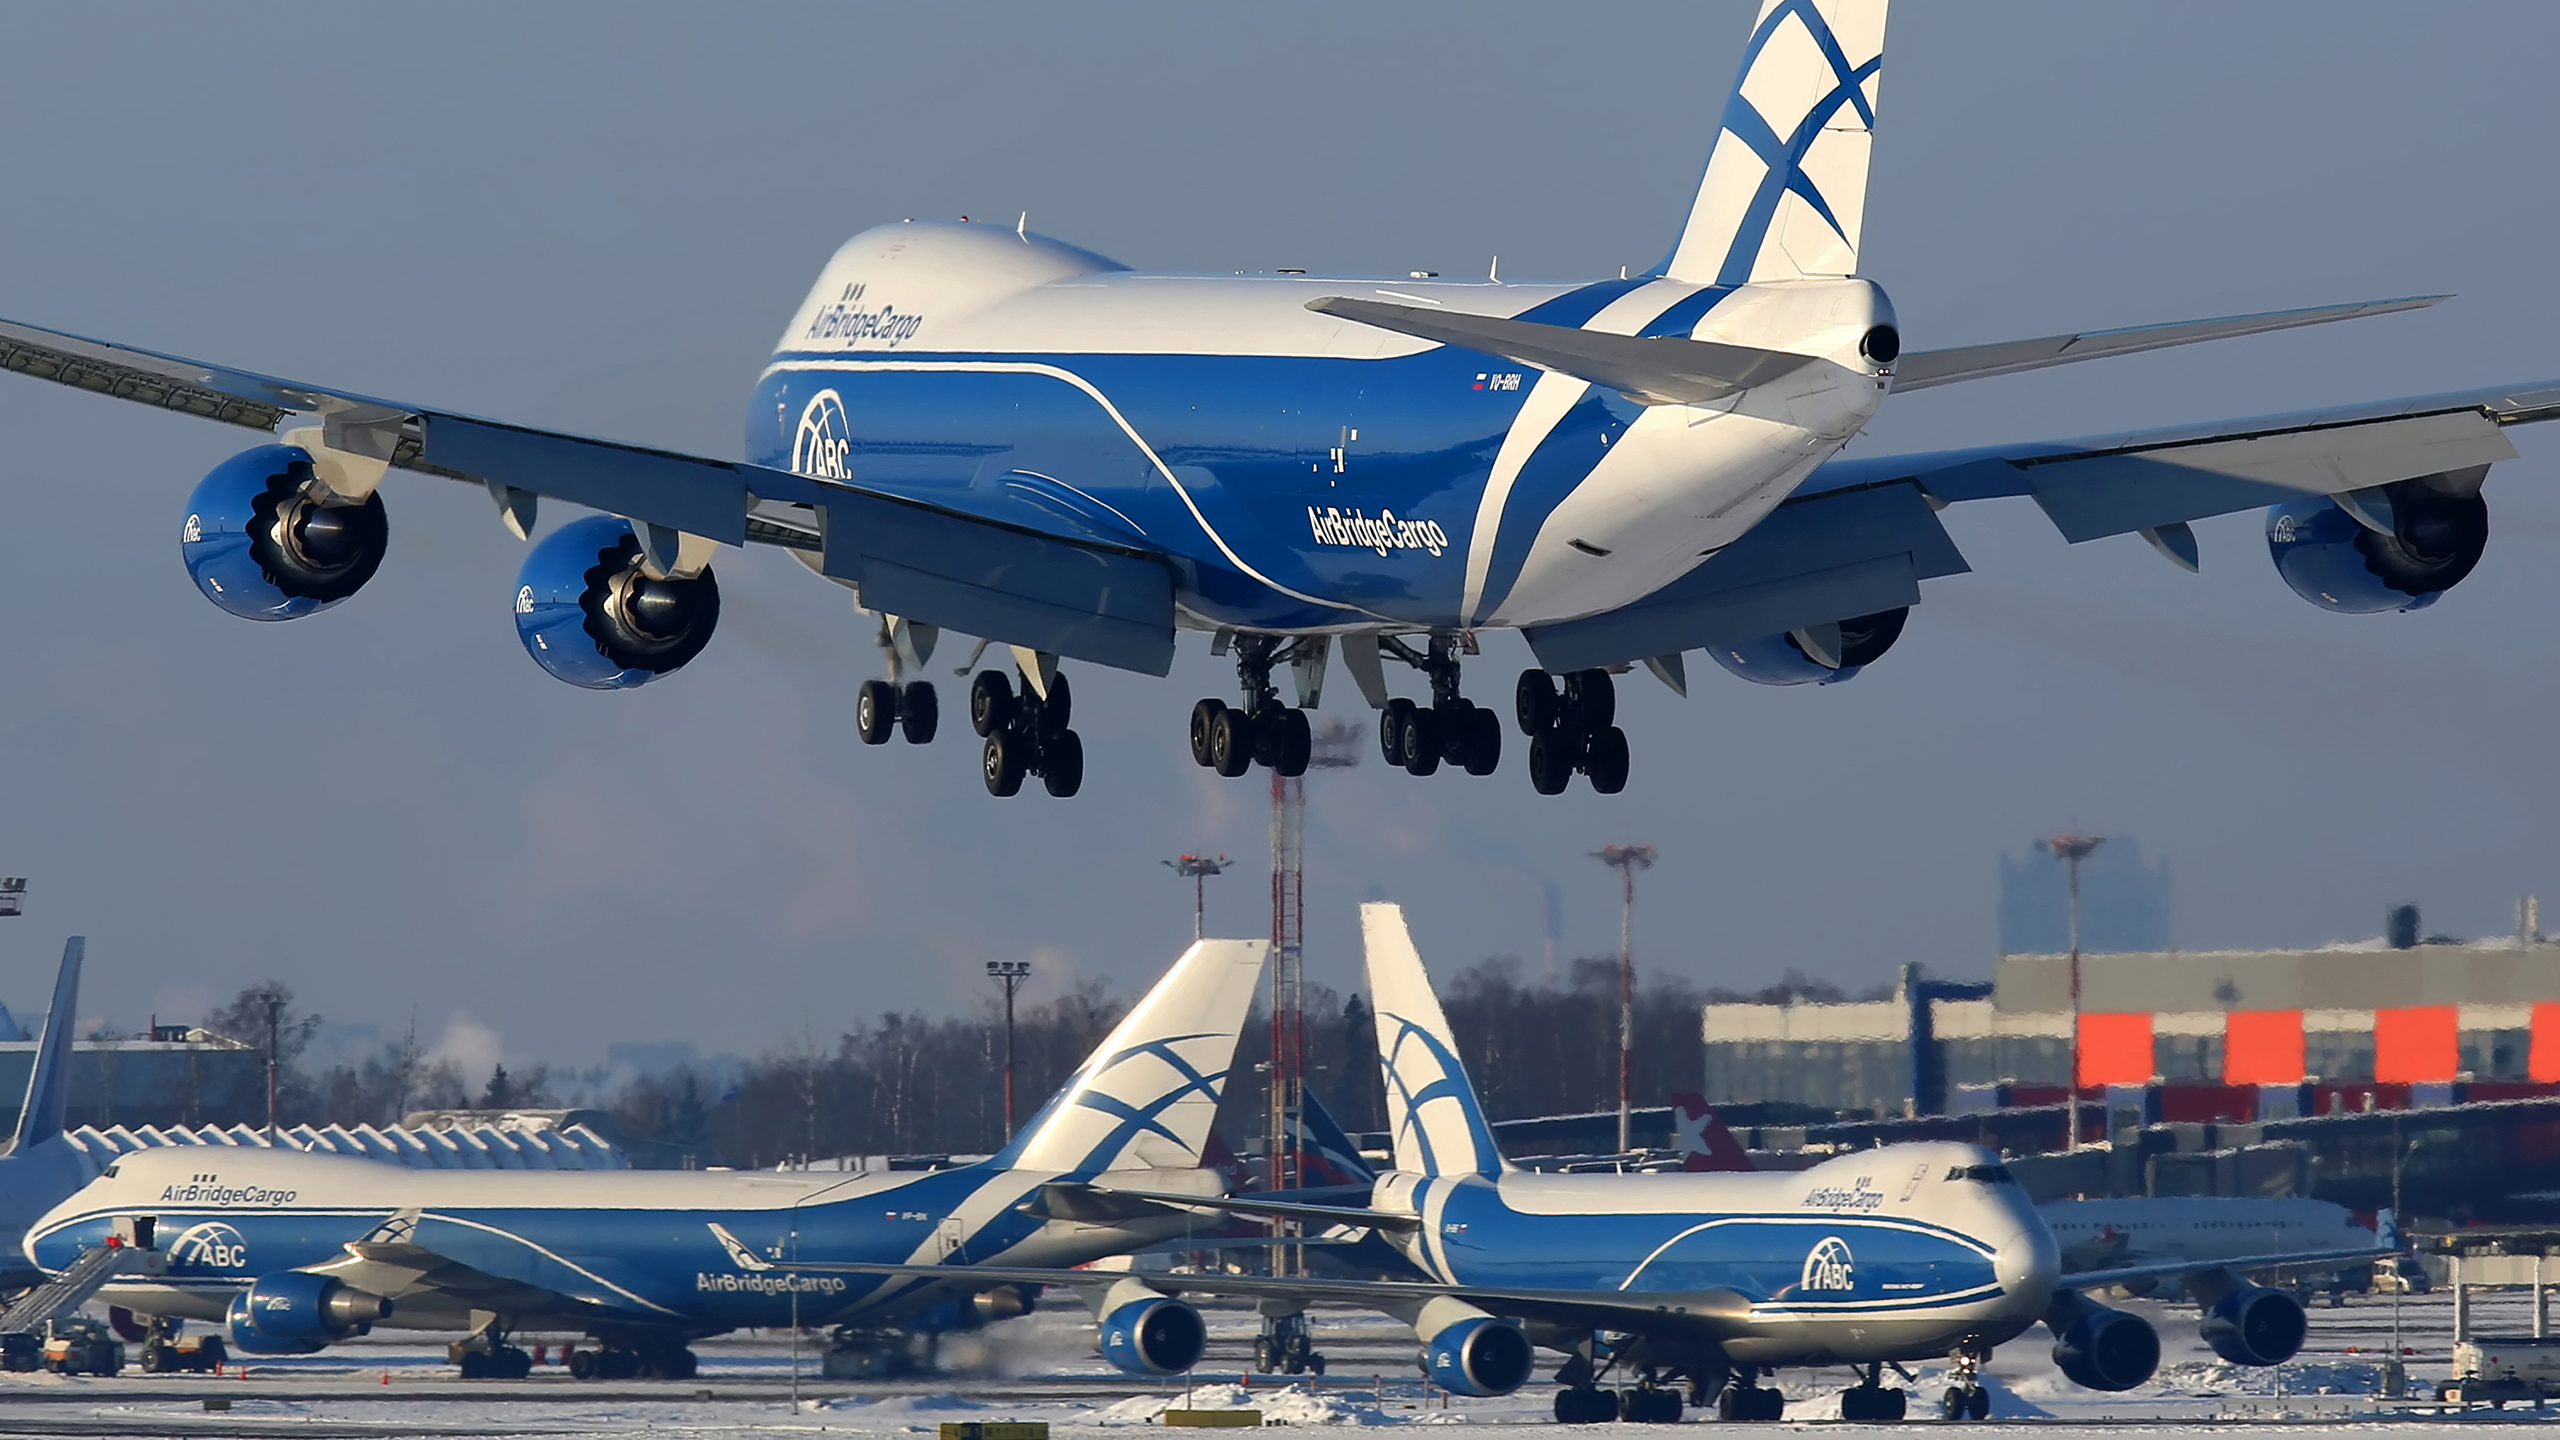 Boeing 747 Airplane Aircraft Cargo Airport 2560x1440